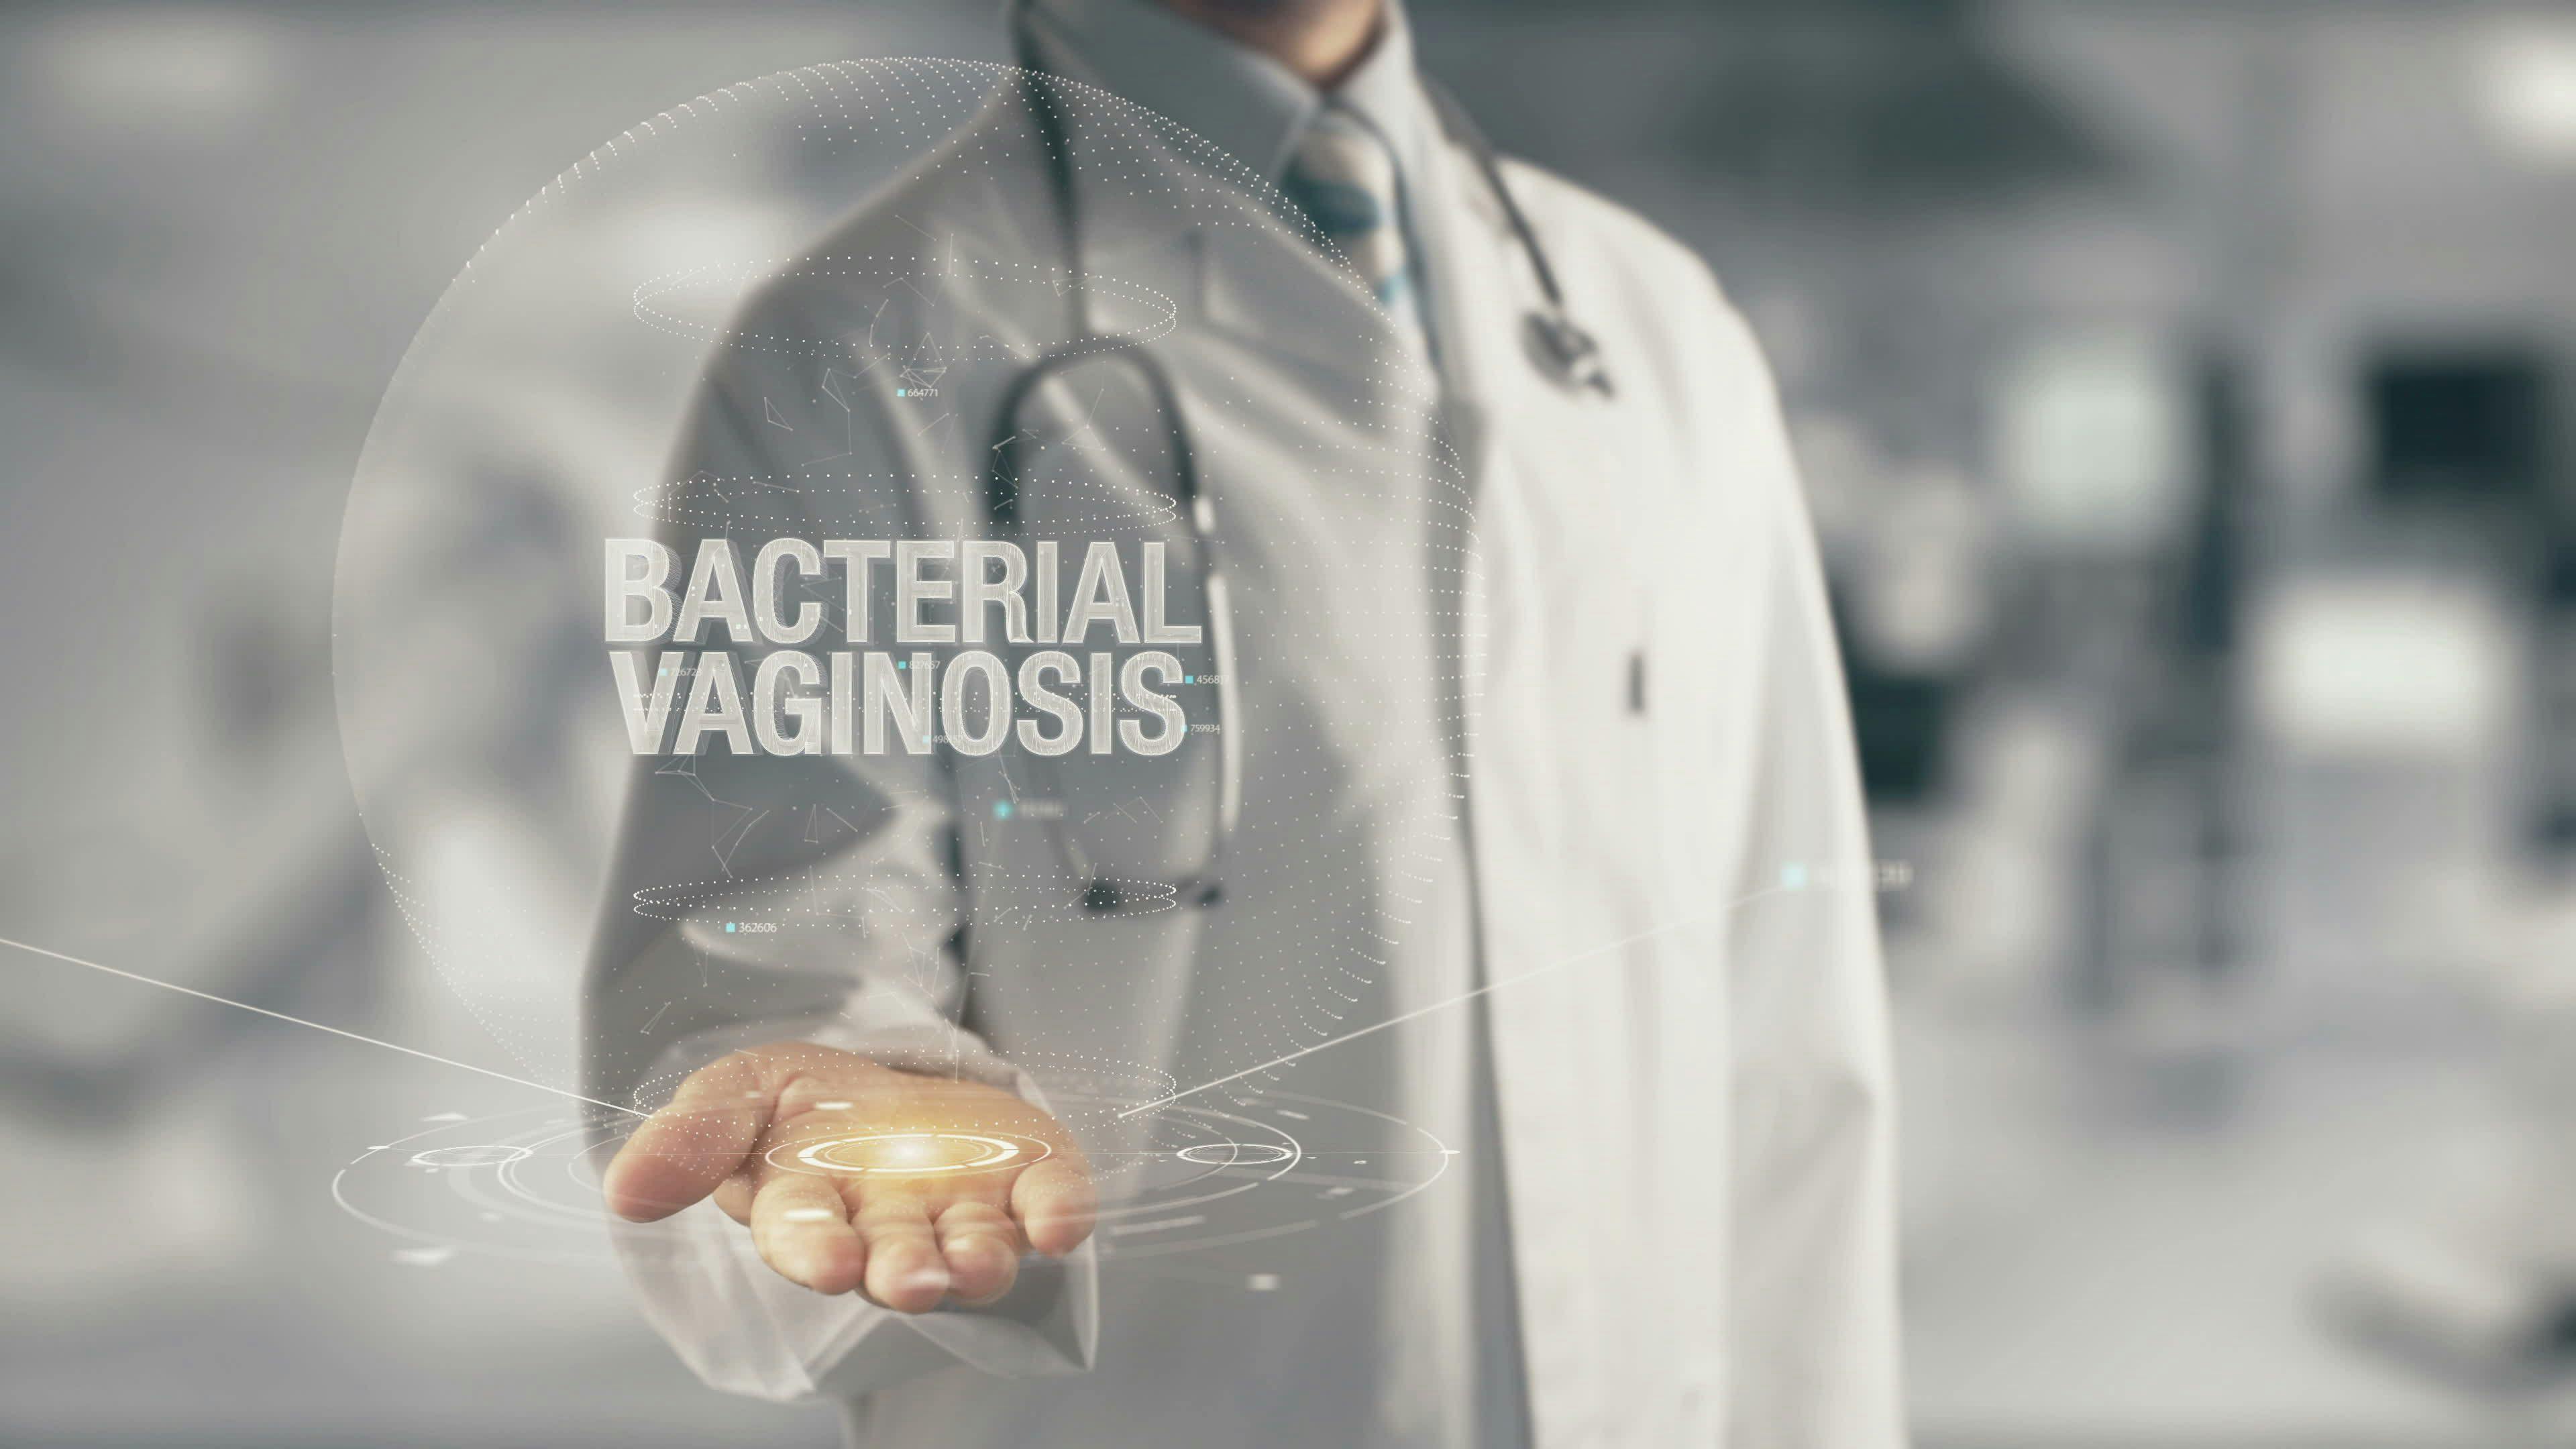 Does bacterial vaginosis increase risk of developing uterine fibroids?